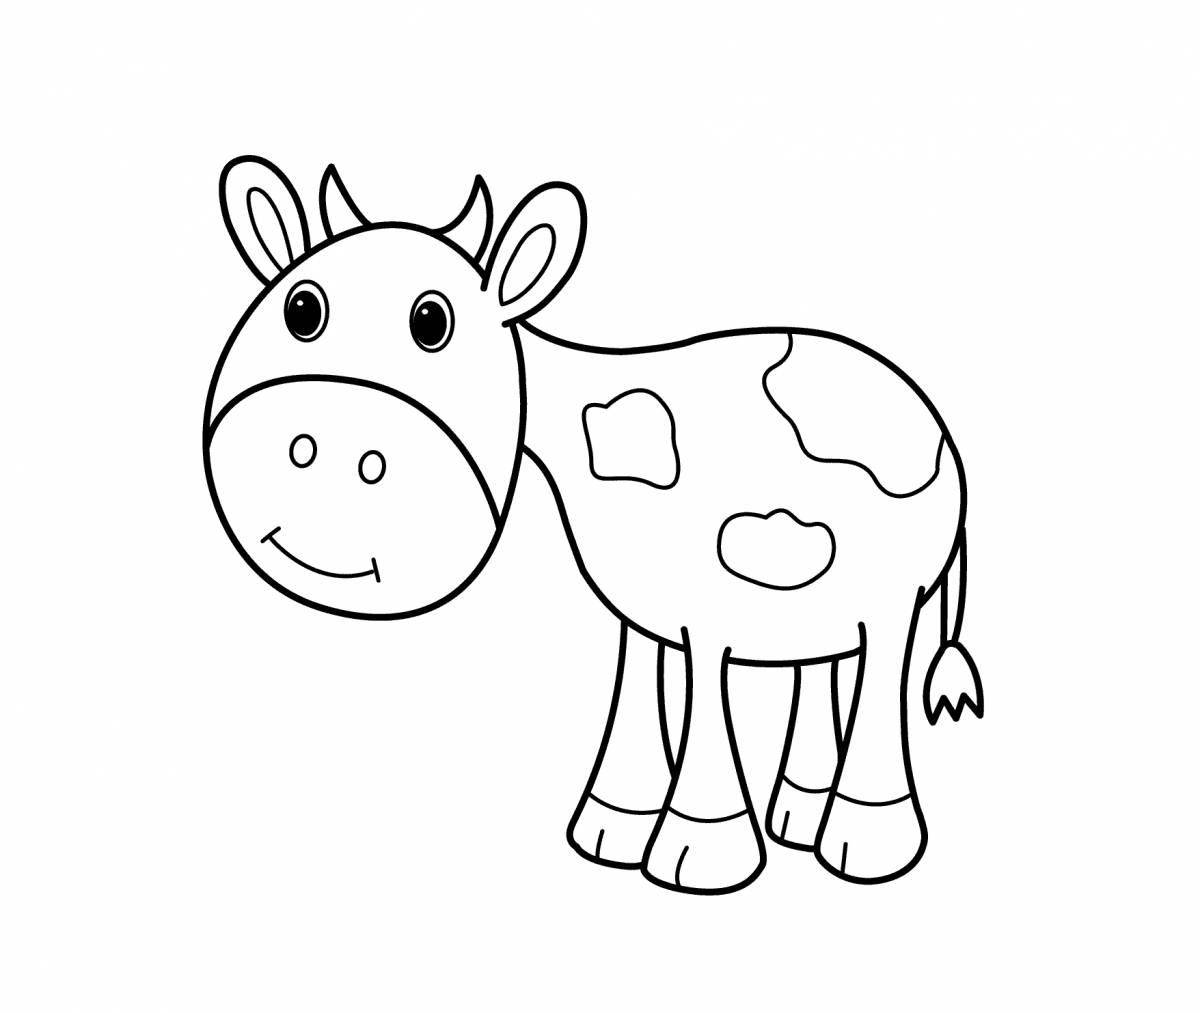 Colorful cow coloring page for 3-4 year olds